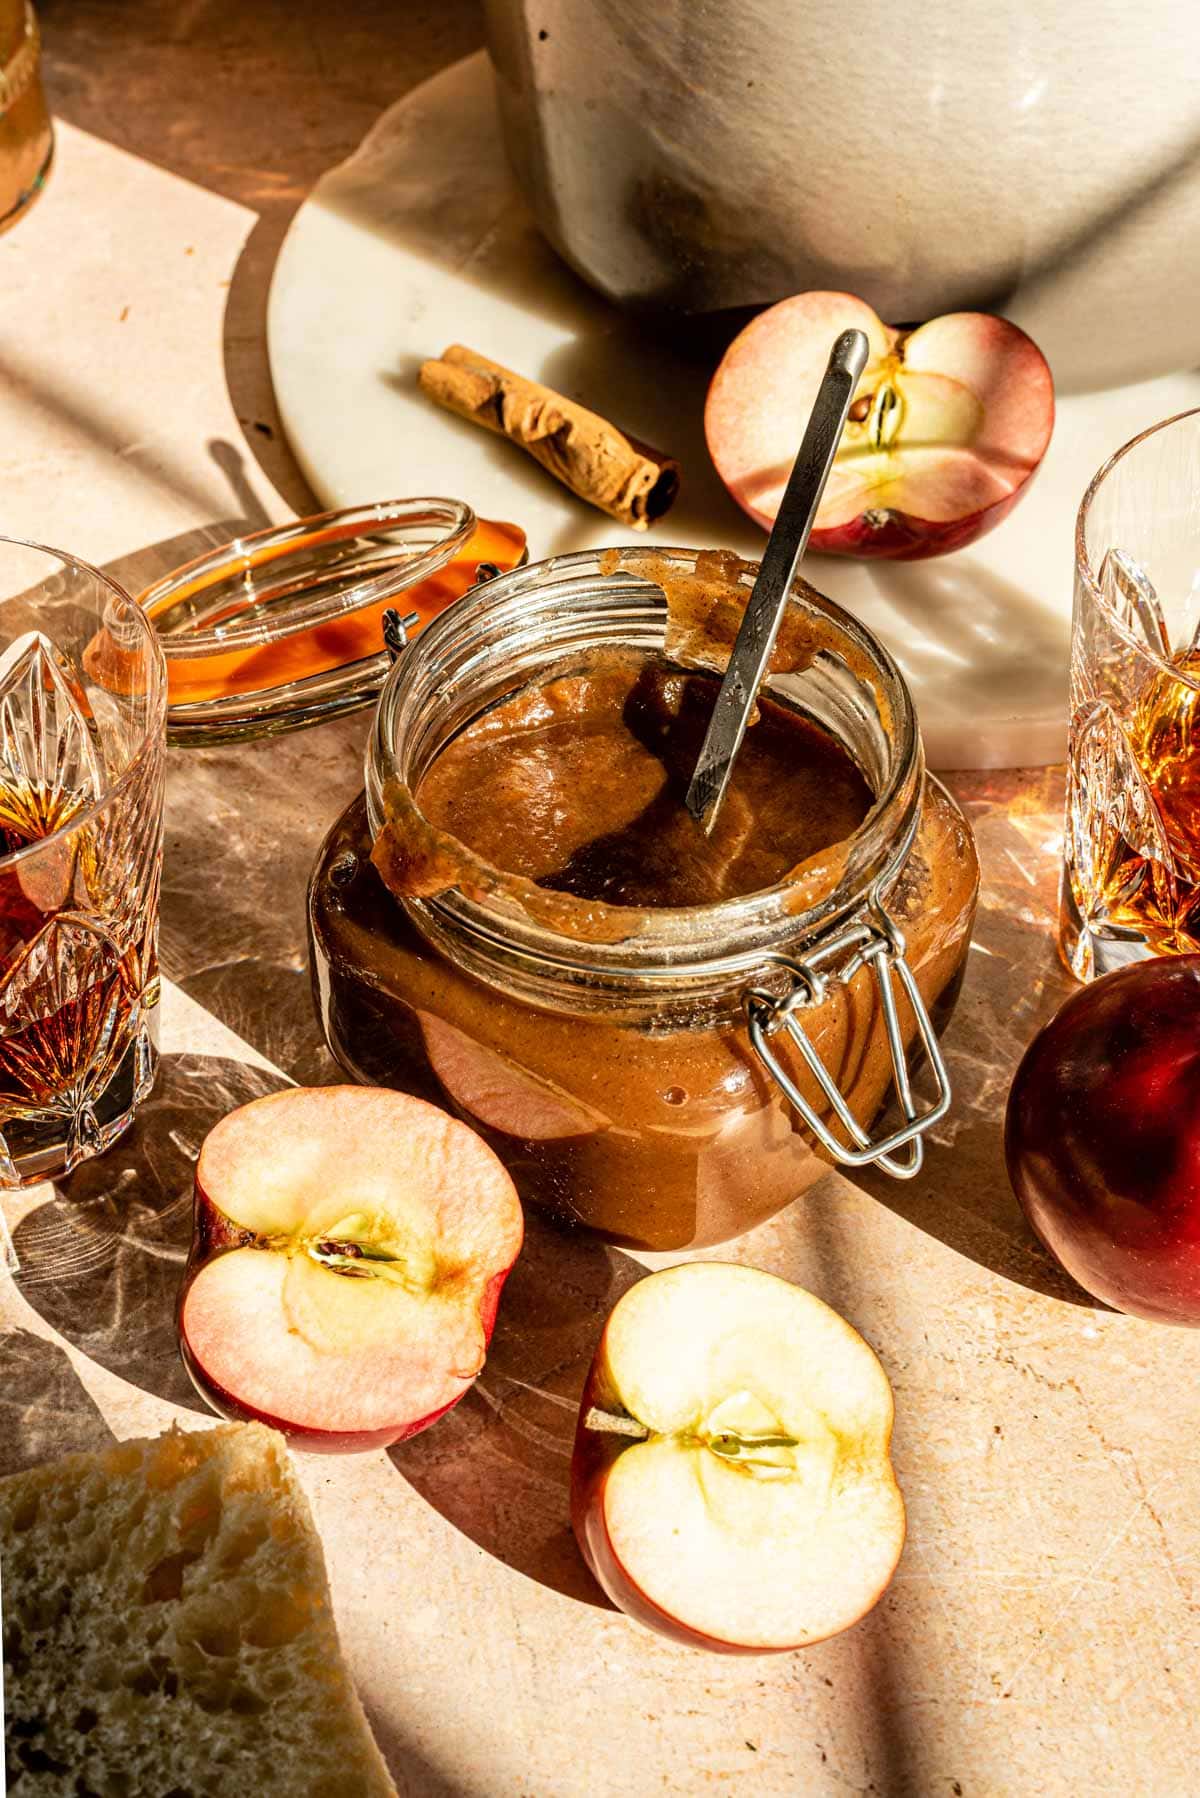 Apple butter in a glass jar with sliced apples off to the side.